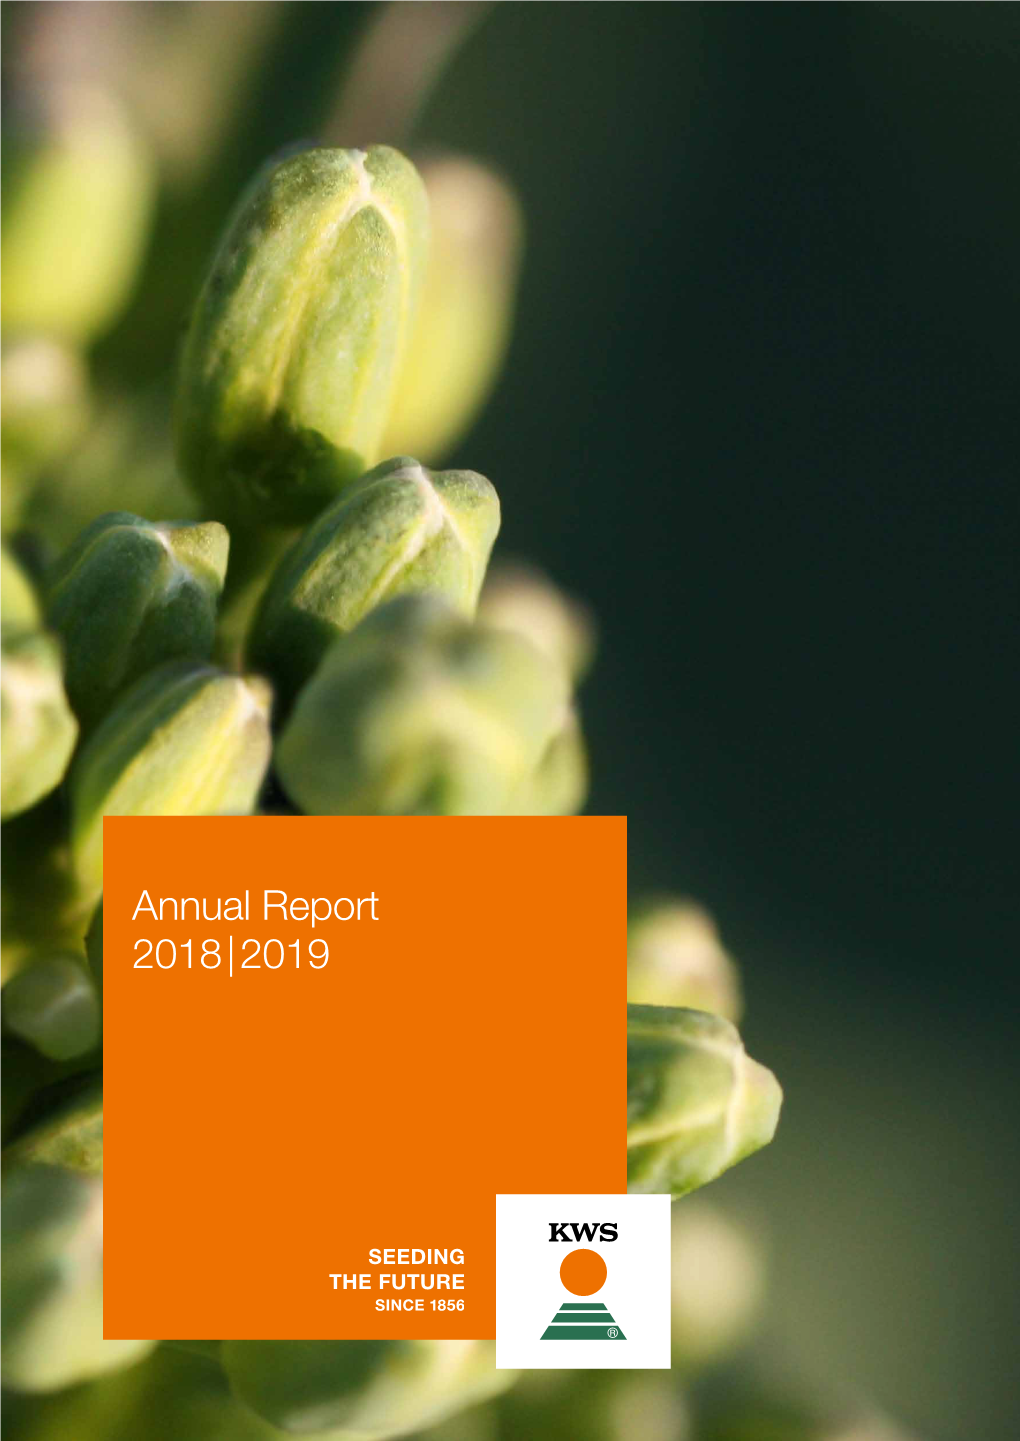 Annual Report 2018 | 2019 2018 |2019 Annual Report KWS in Figures